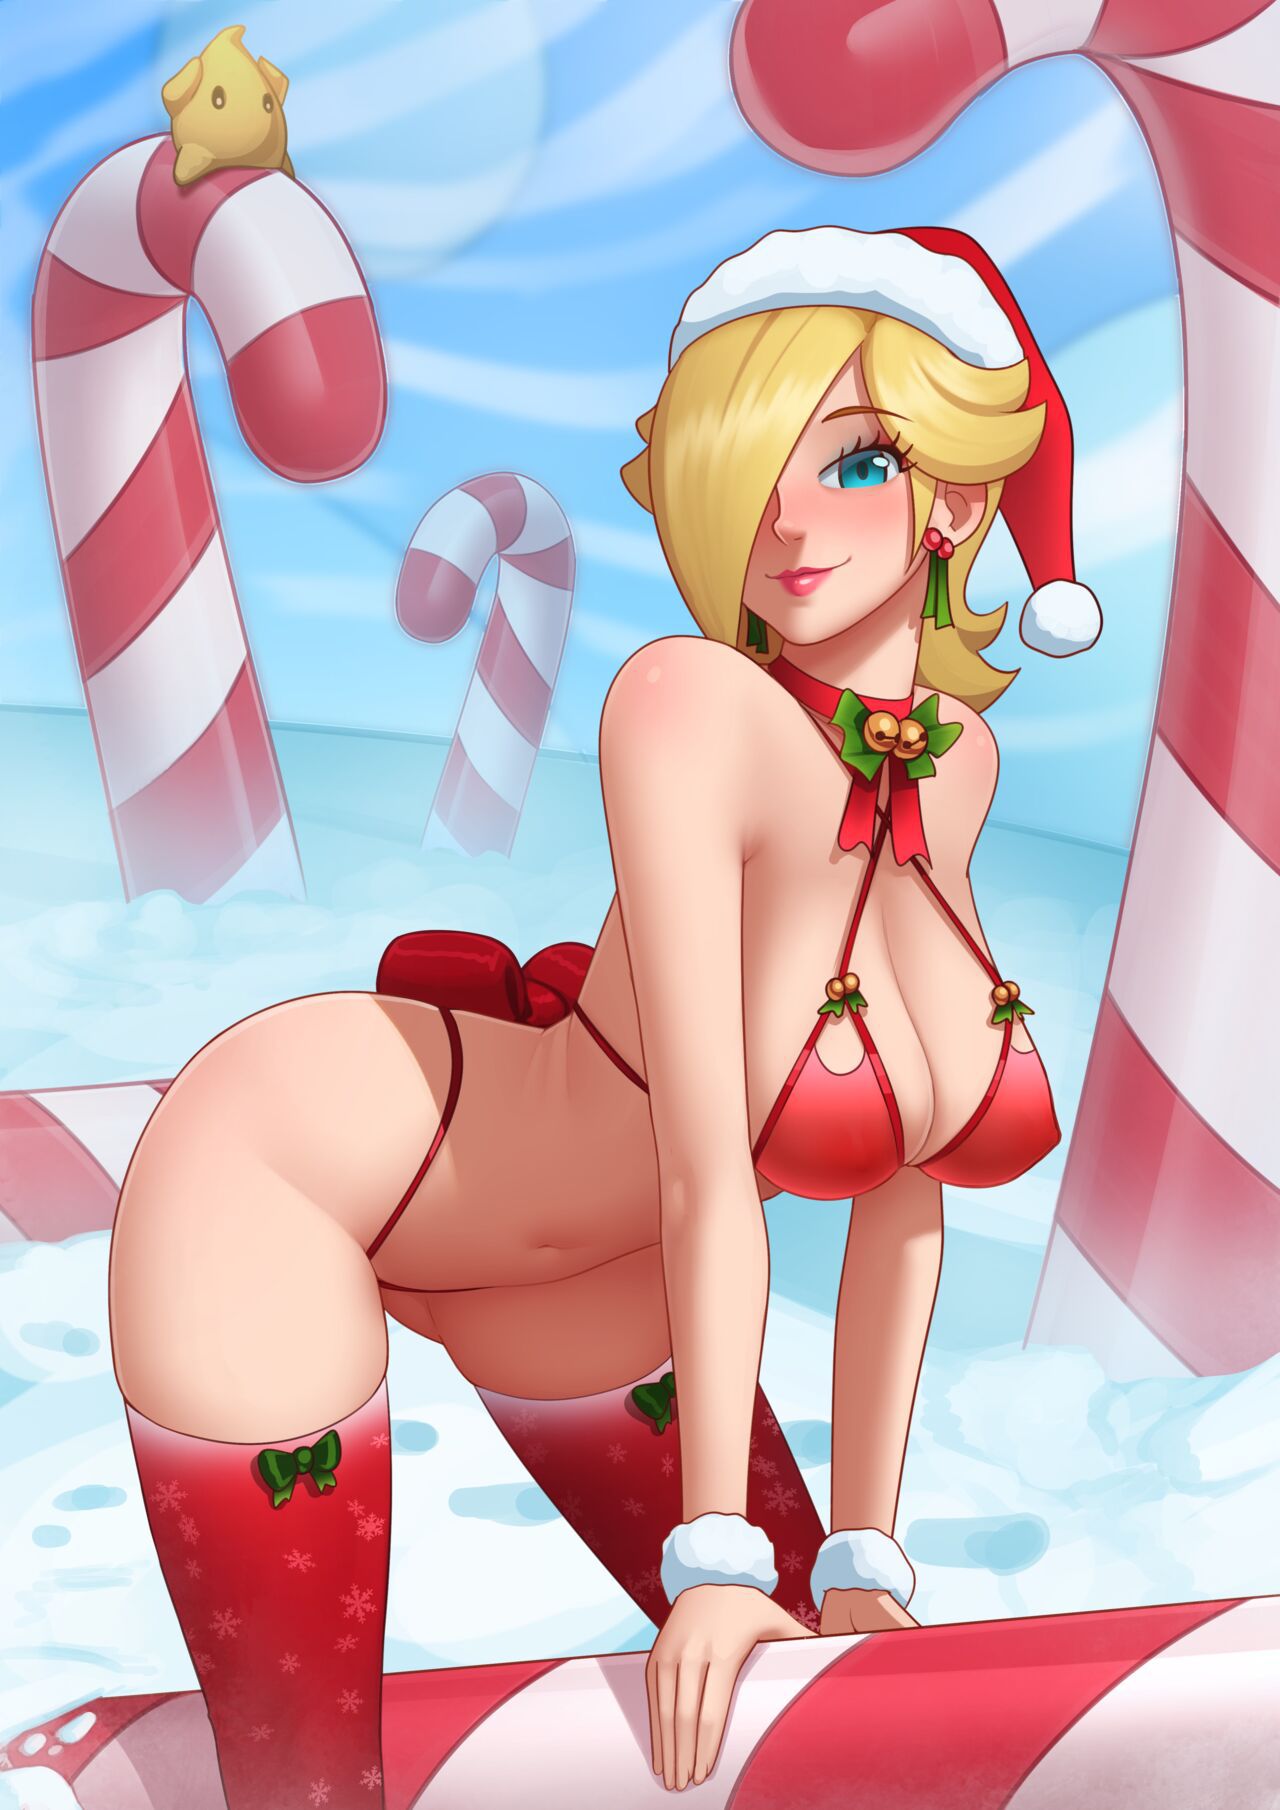 [Deilan12] Candy Canes Appeared 1